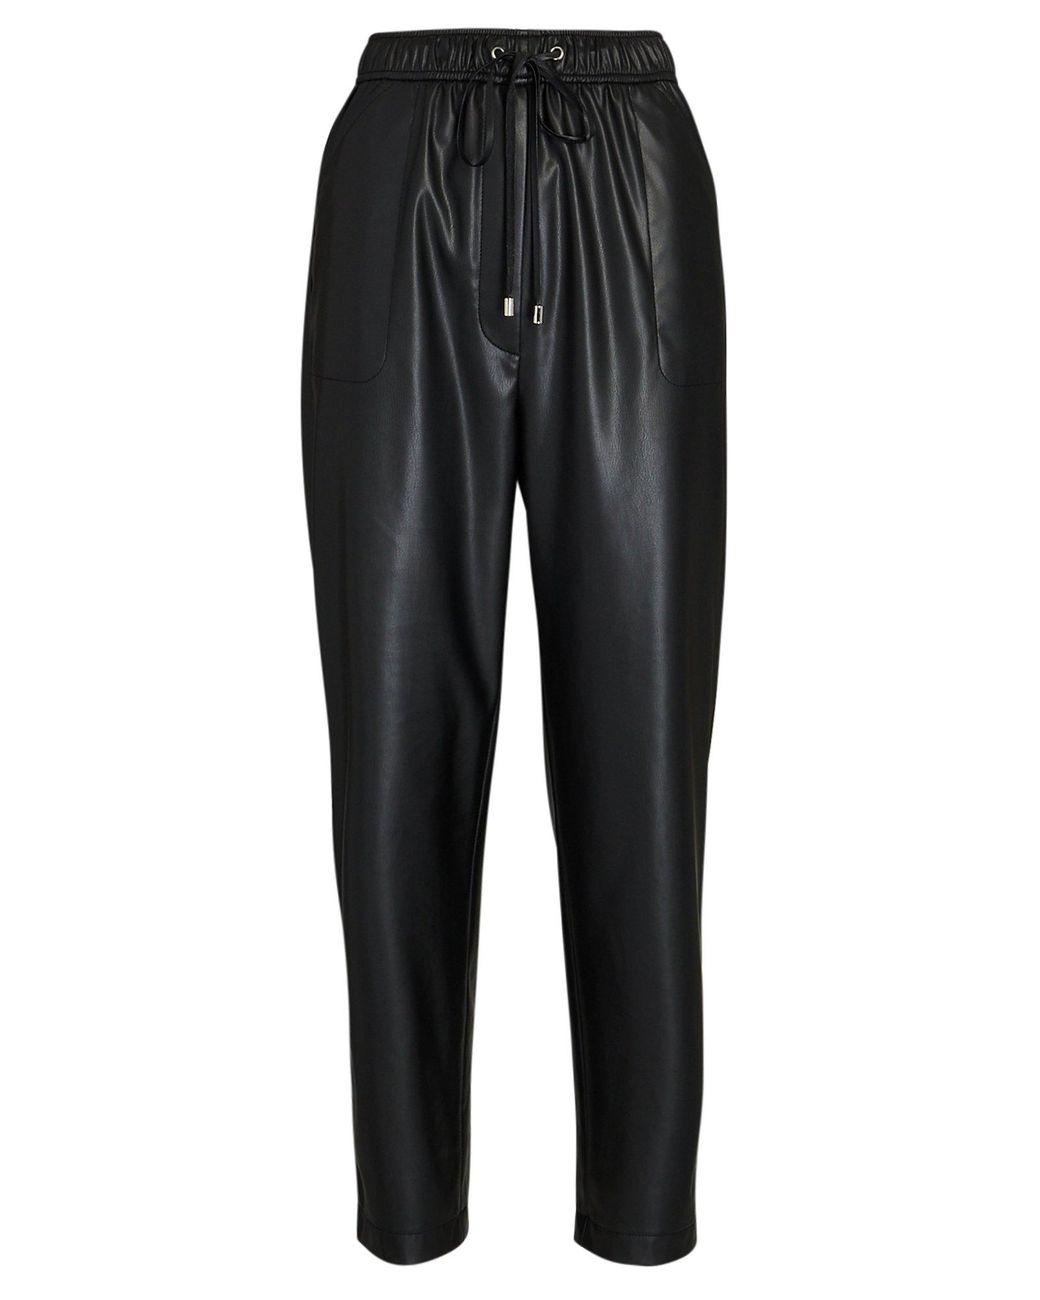 Intermix Kitson Cropped Faux Leather Pants in Black | Lyst